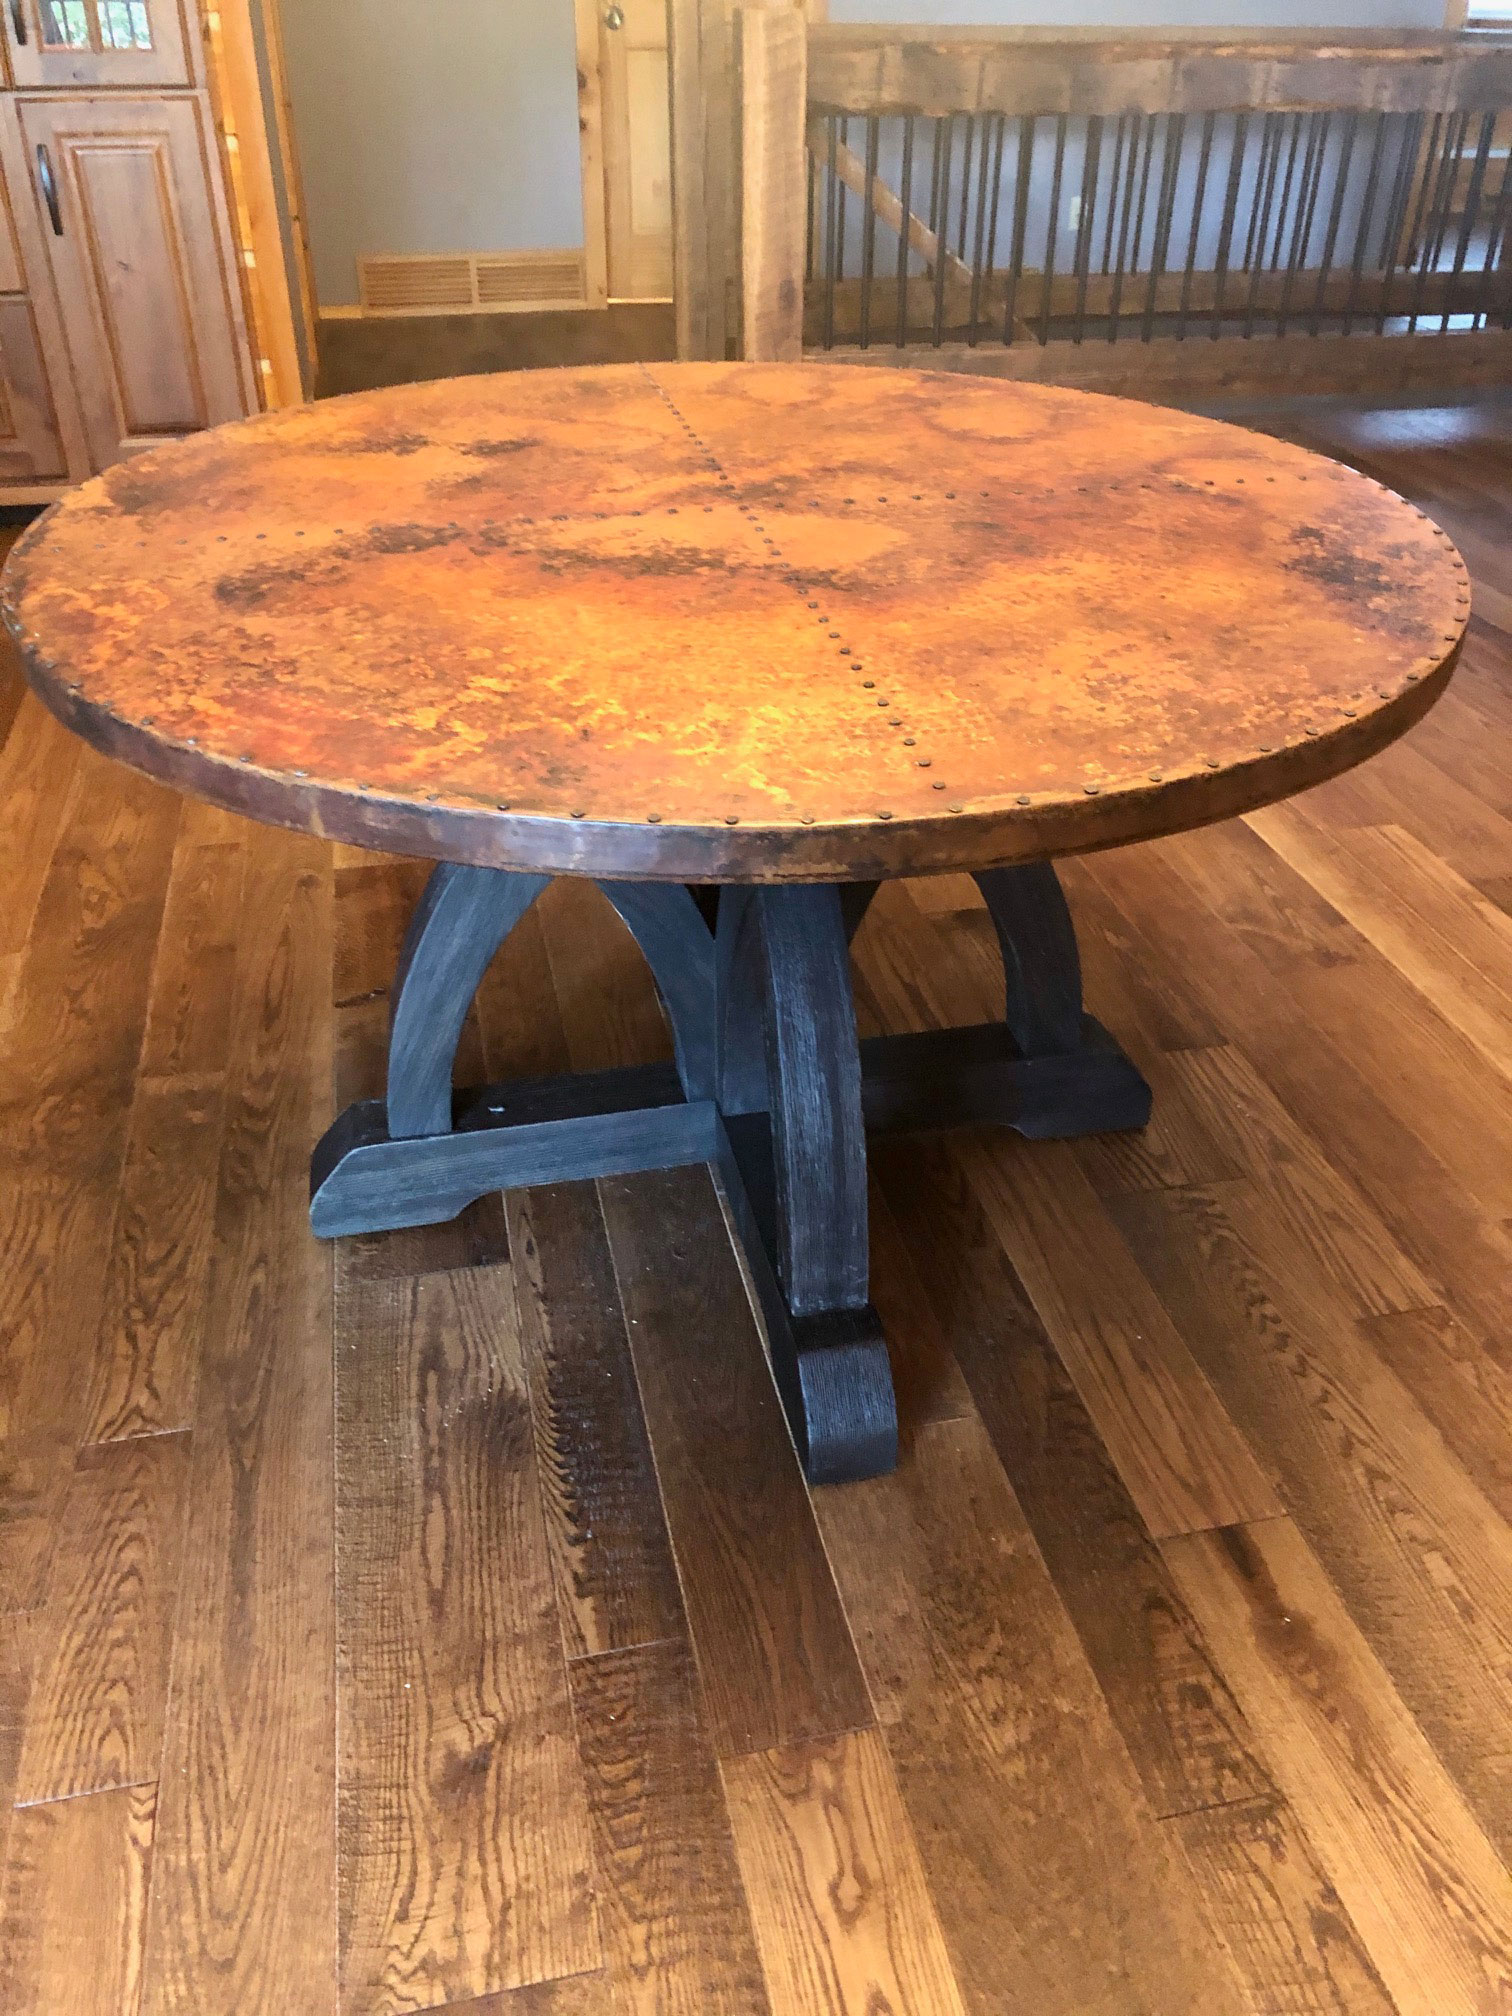 Round copper tabletop with black legs in room with hardwood floors WorldCopperSmith